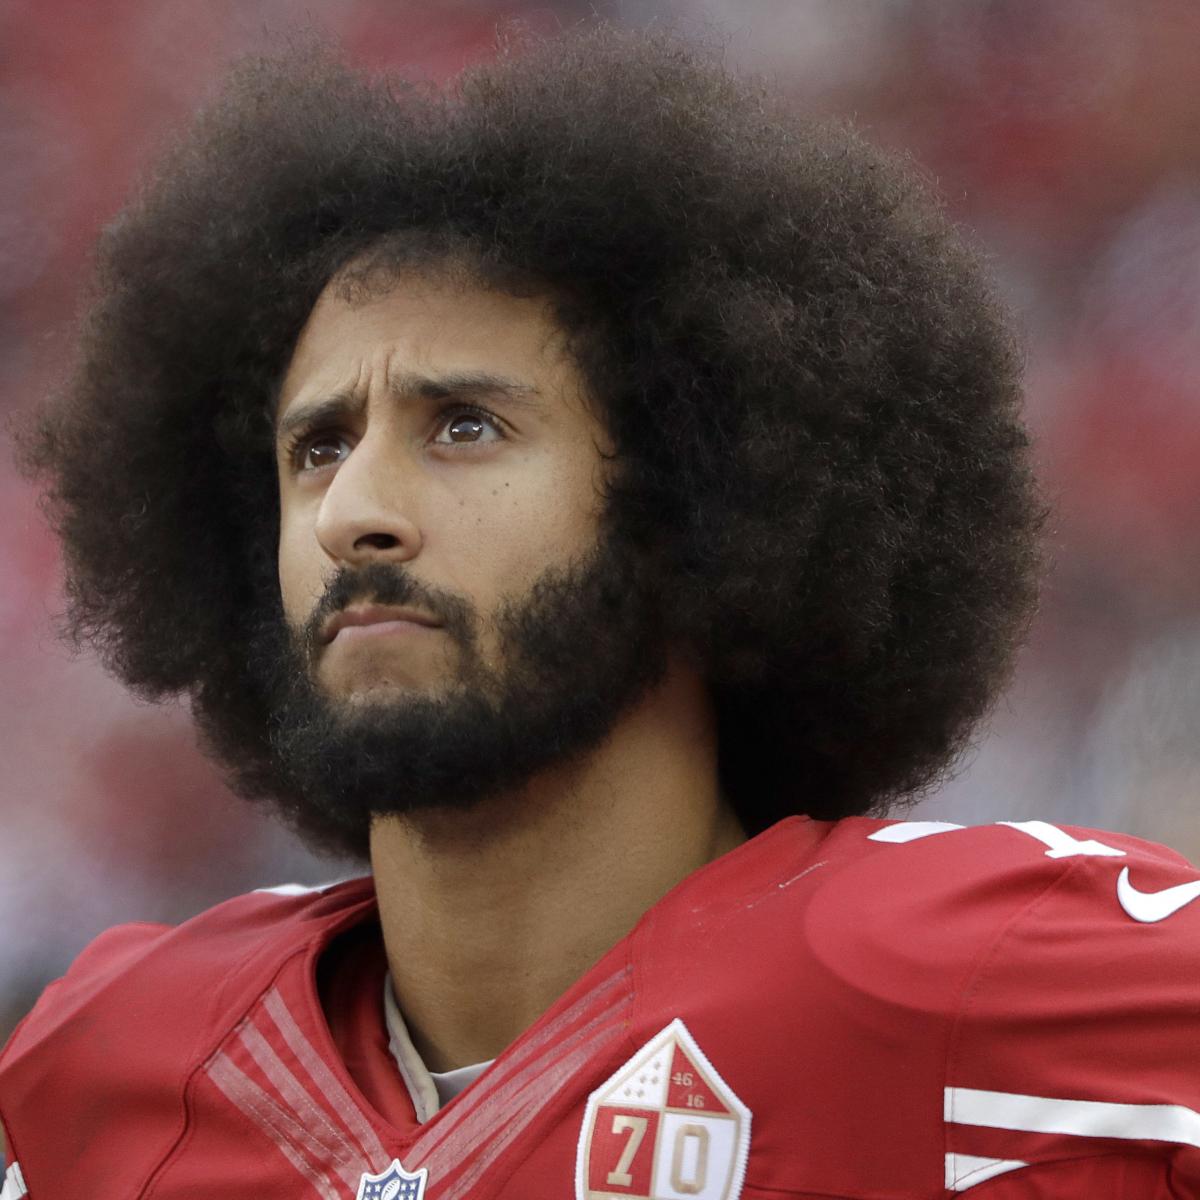 Colin Kaepernick Sentenced to NFL Limbo for the Crime of Speaking His Mind